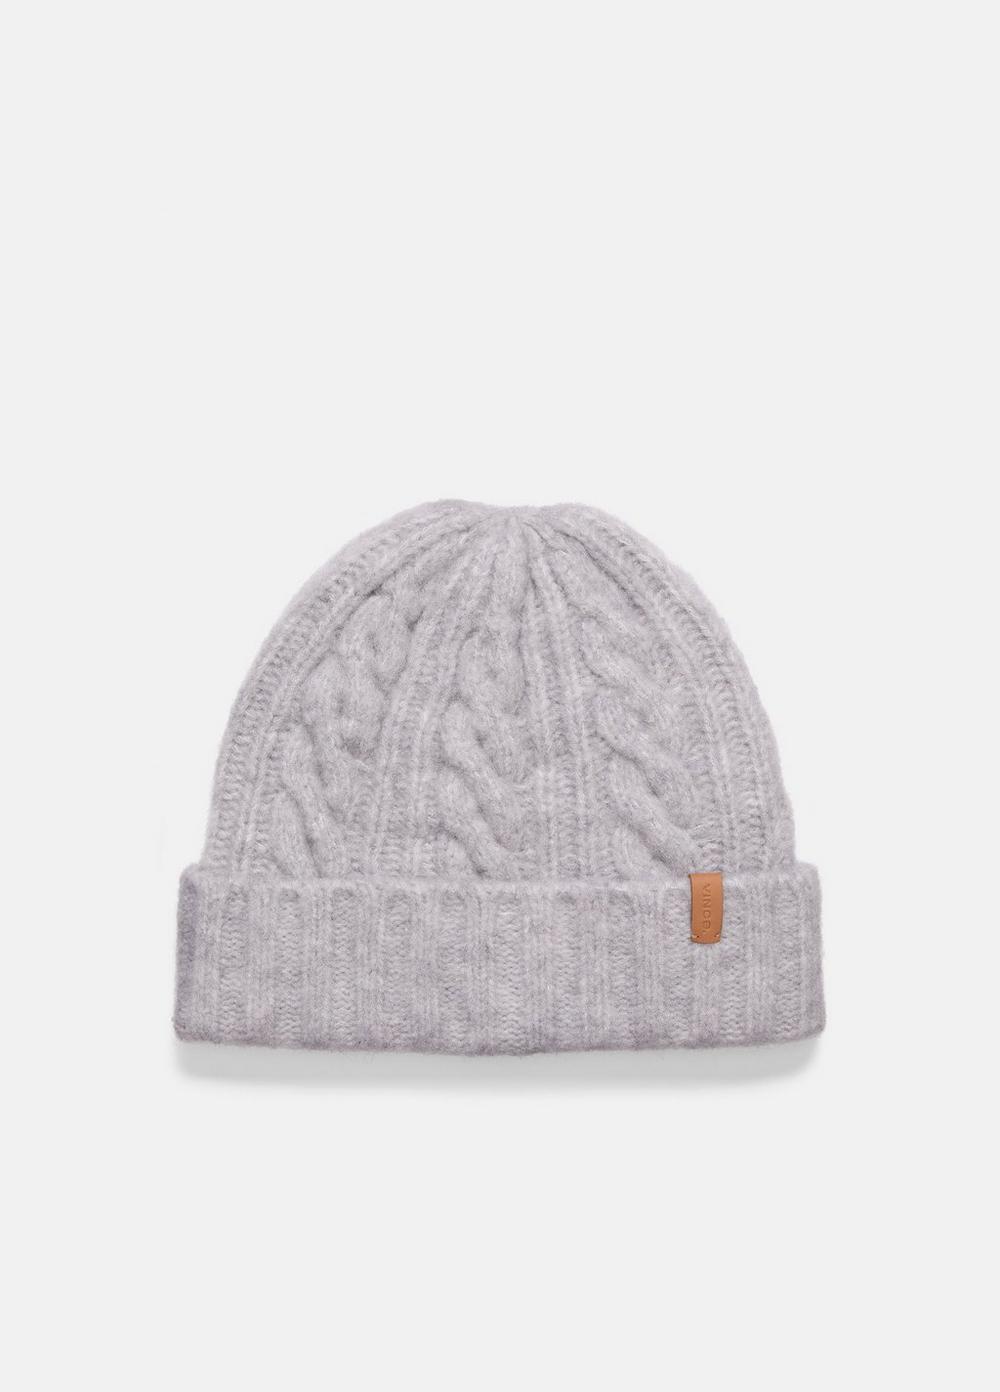 Airspun Merino Wool-Blend Cable-Knit Cuffed Hat, Steel Vince